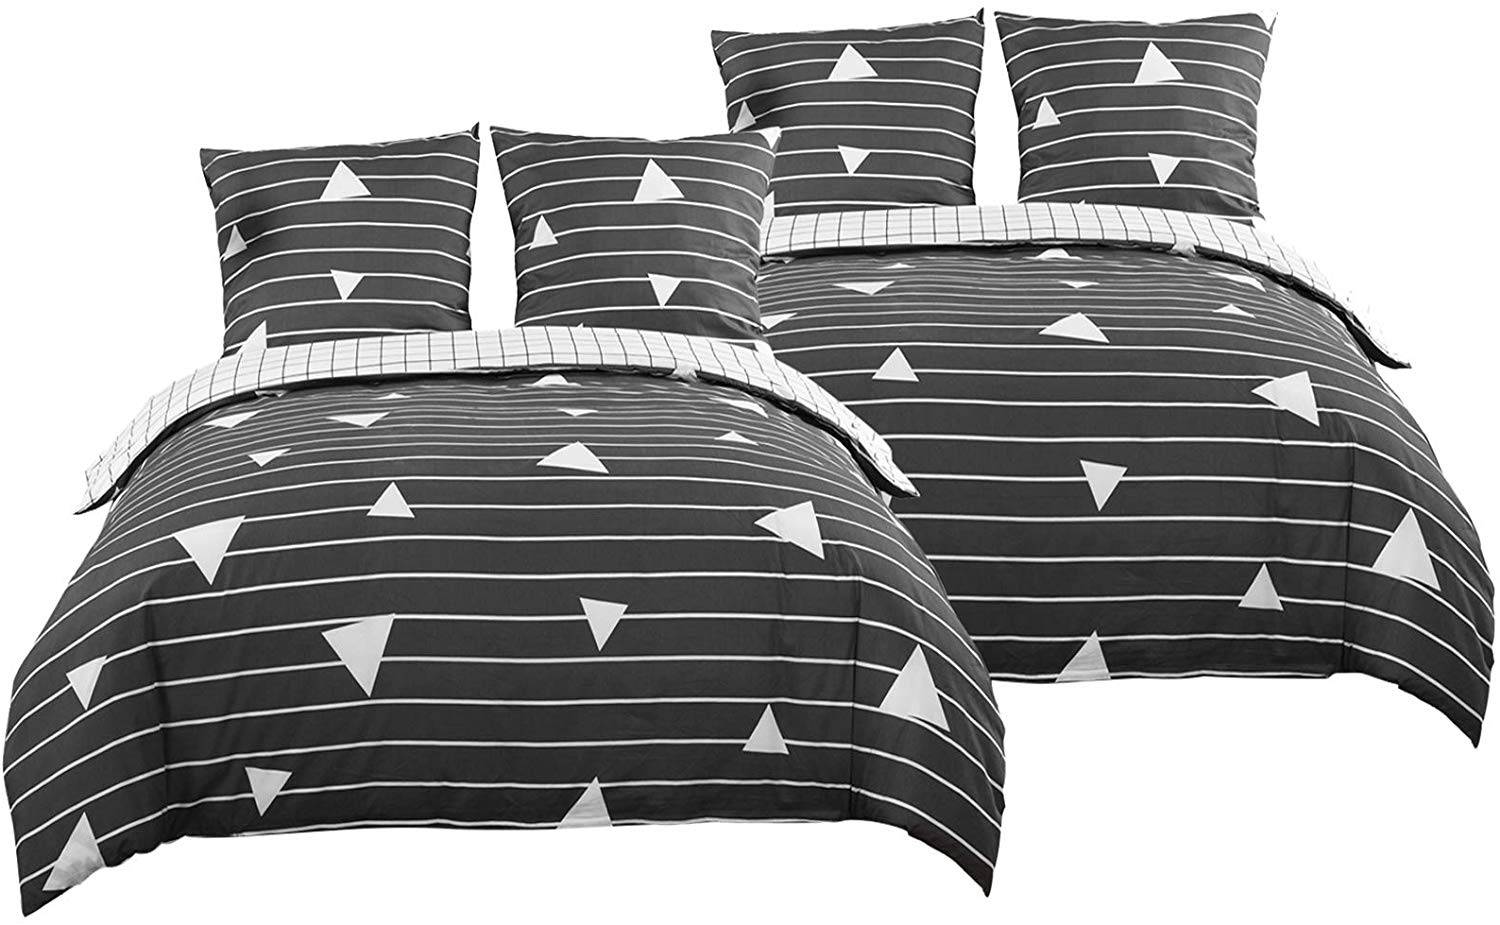 2 Sets Of Duvet Covers With Pillowcases 100 Cotton Stripe Quilt